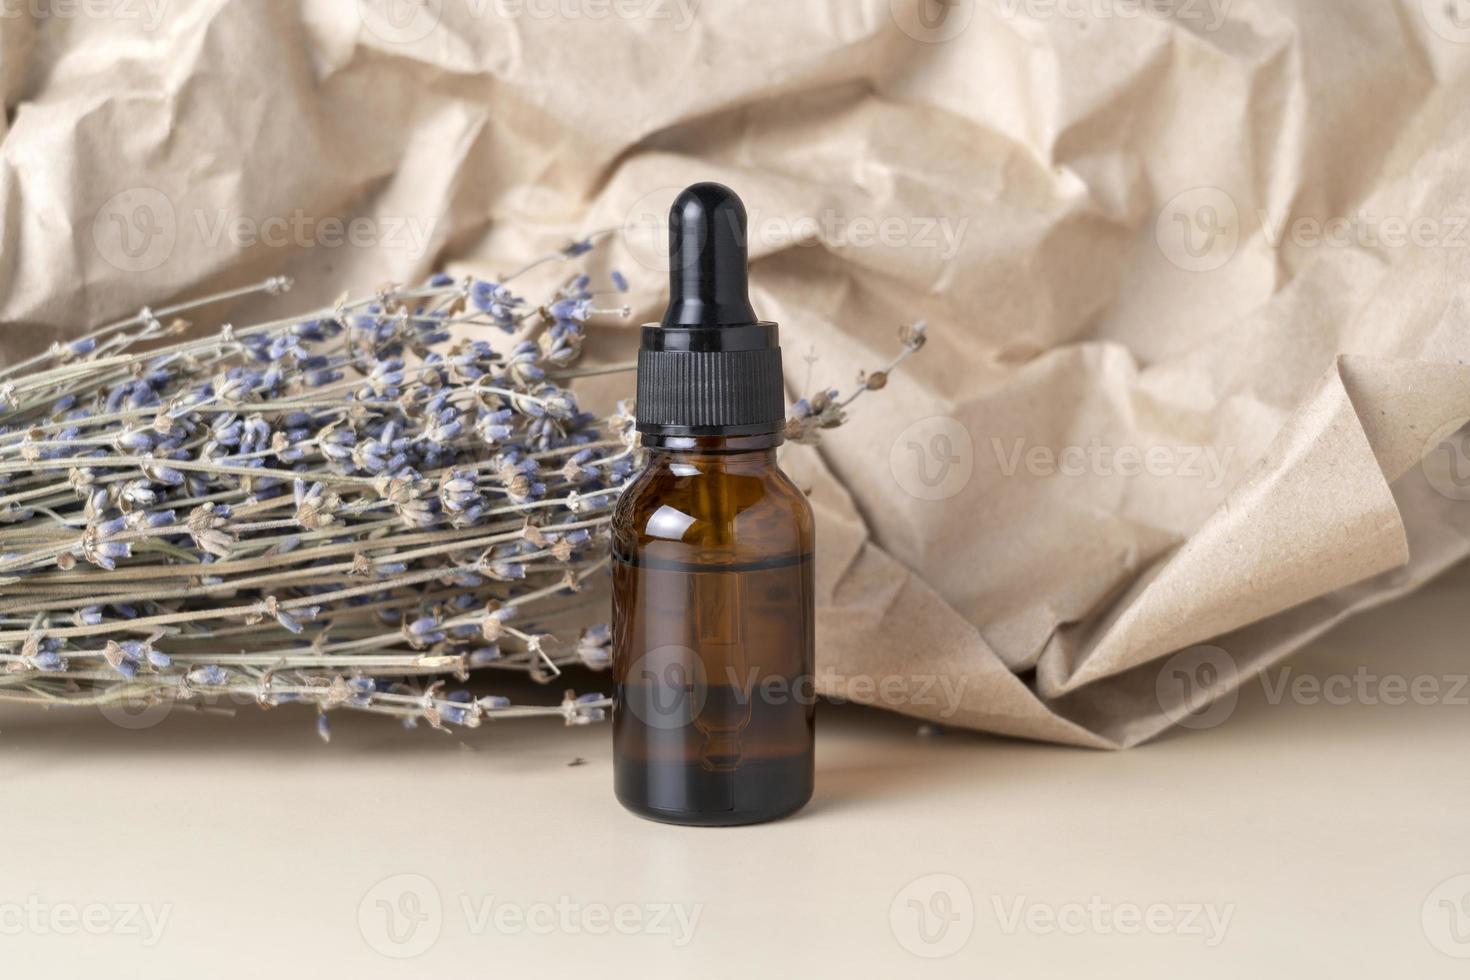 A face serum or oil in a brown dropper bottle standing on a beige table background with lavender flowers nearby photo